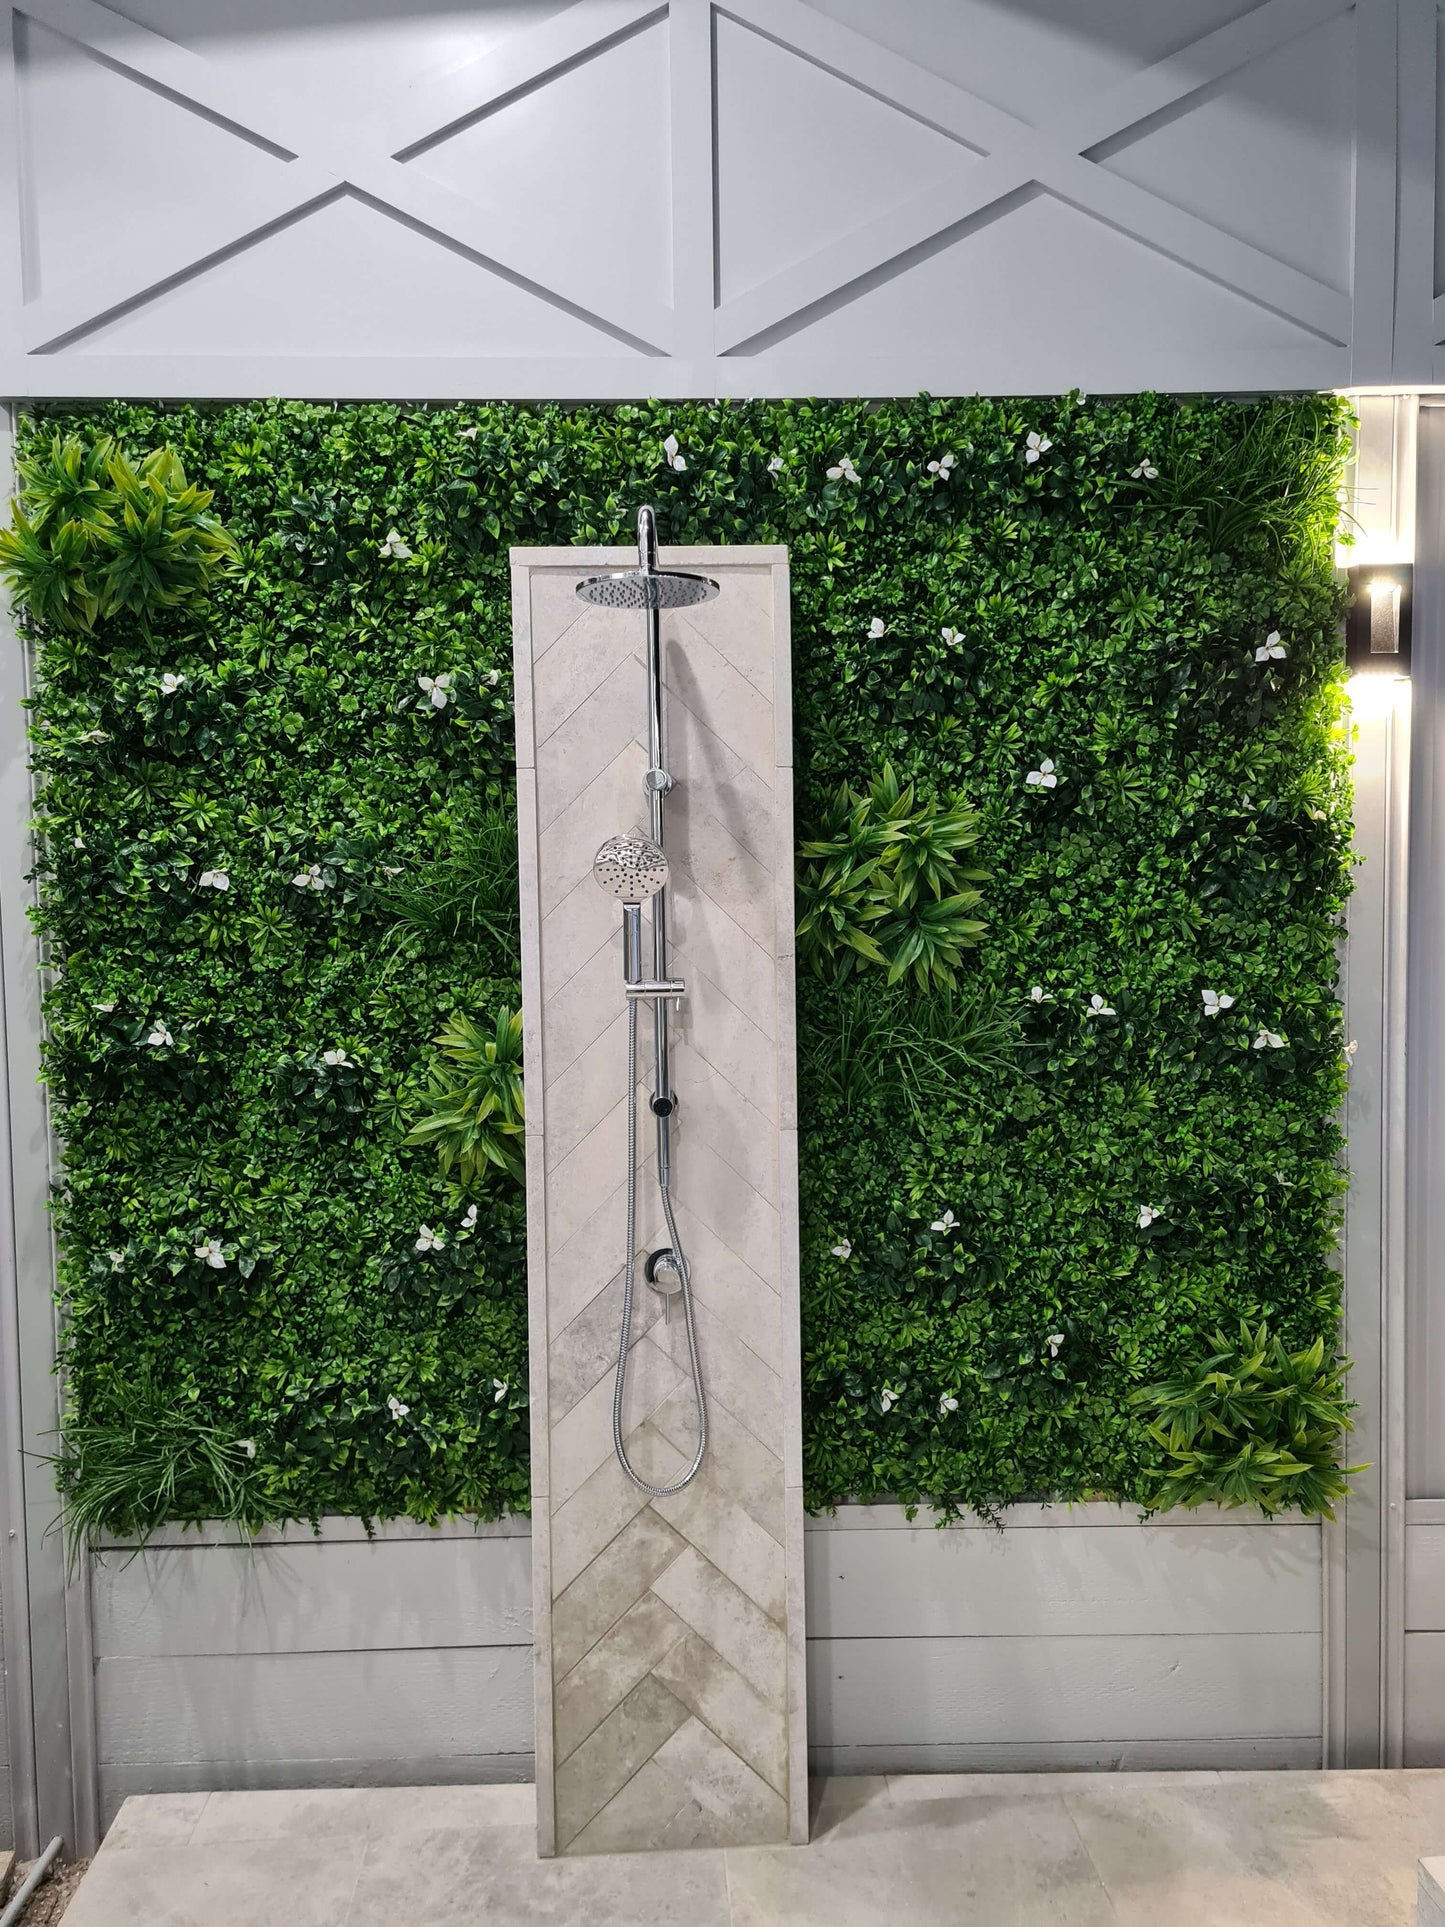 Artificial White Oasis Living Wall Garden 28SQ FT UV Resistant